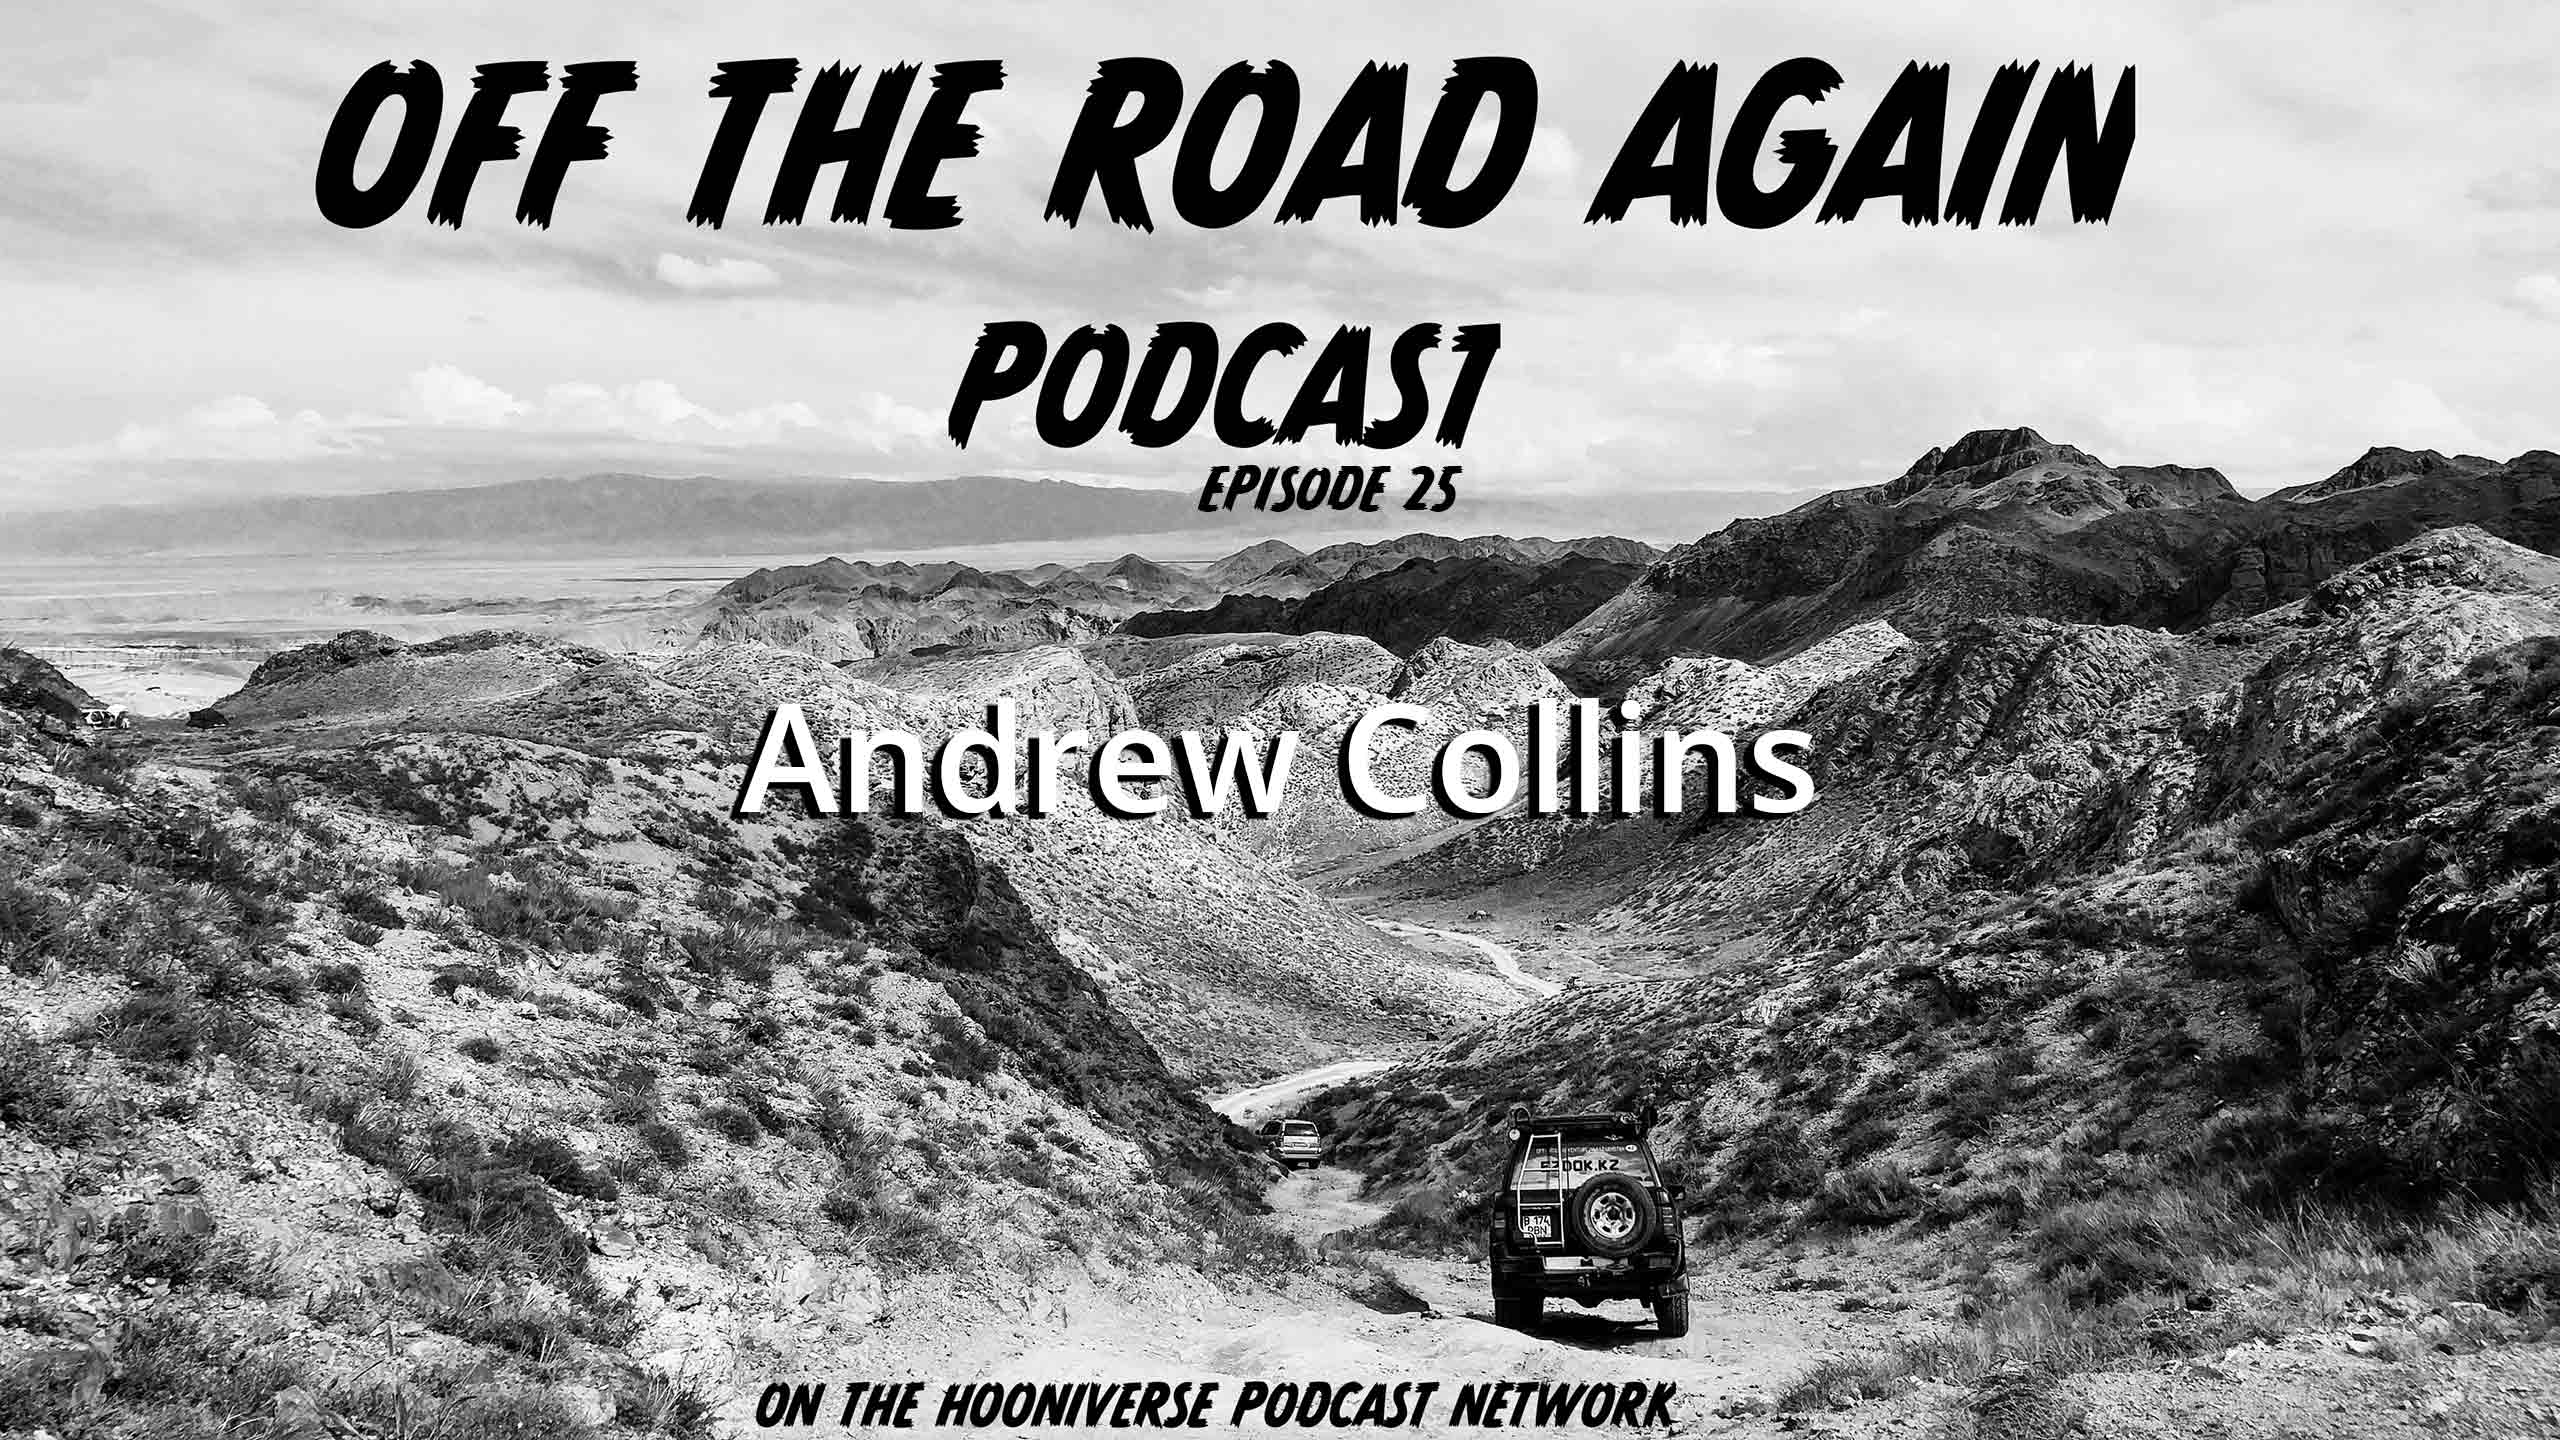 Off The Road Again Podcast: Andrew Collins